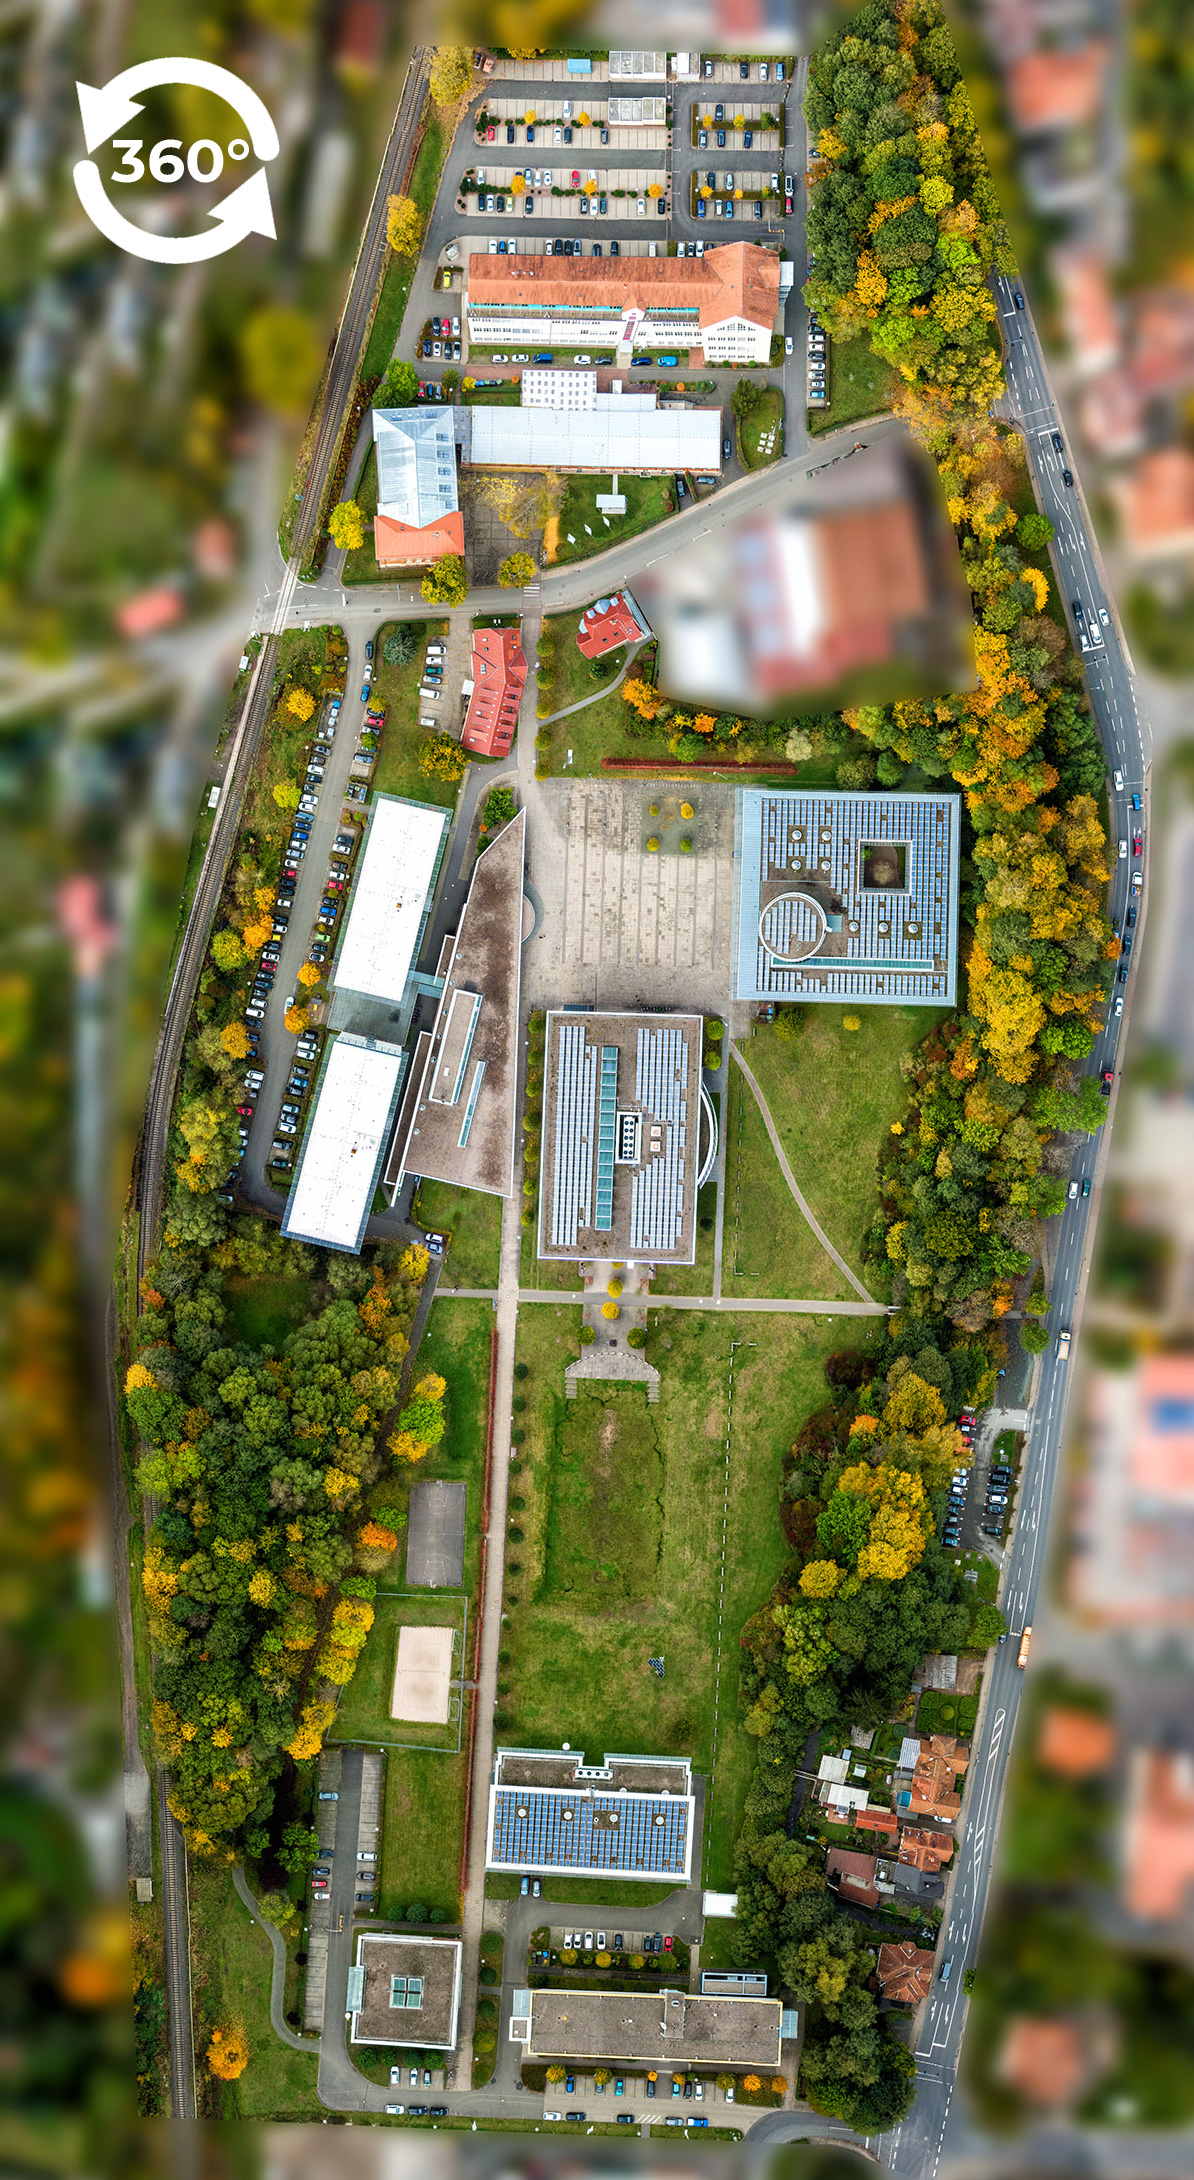 Aerial view of the university